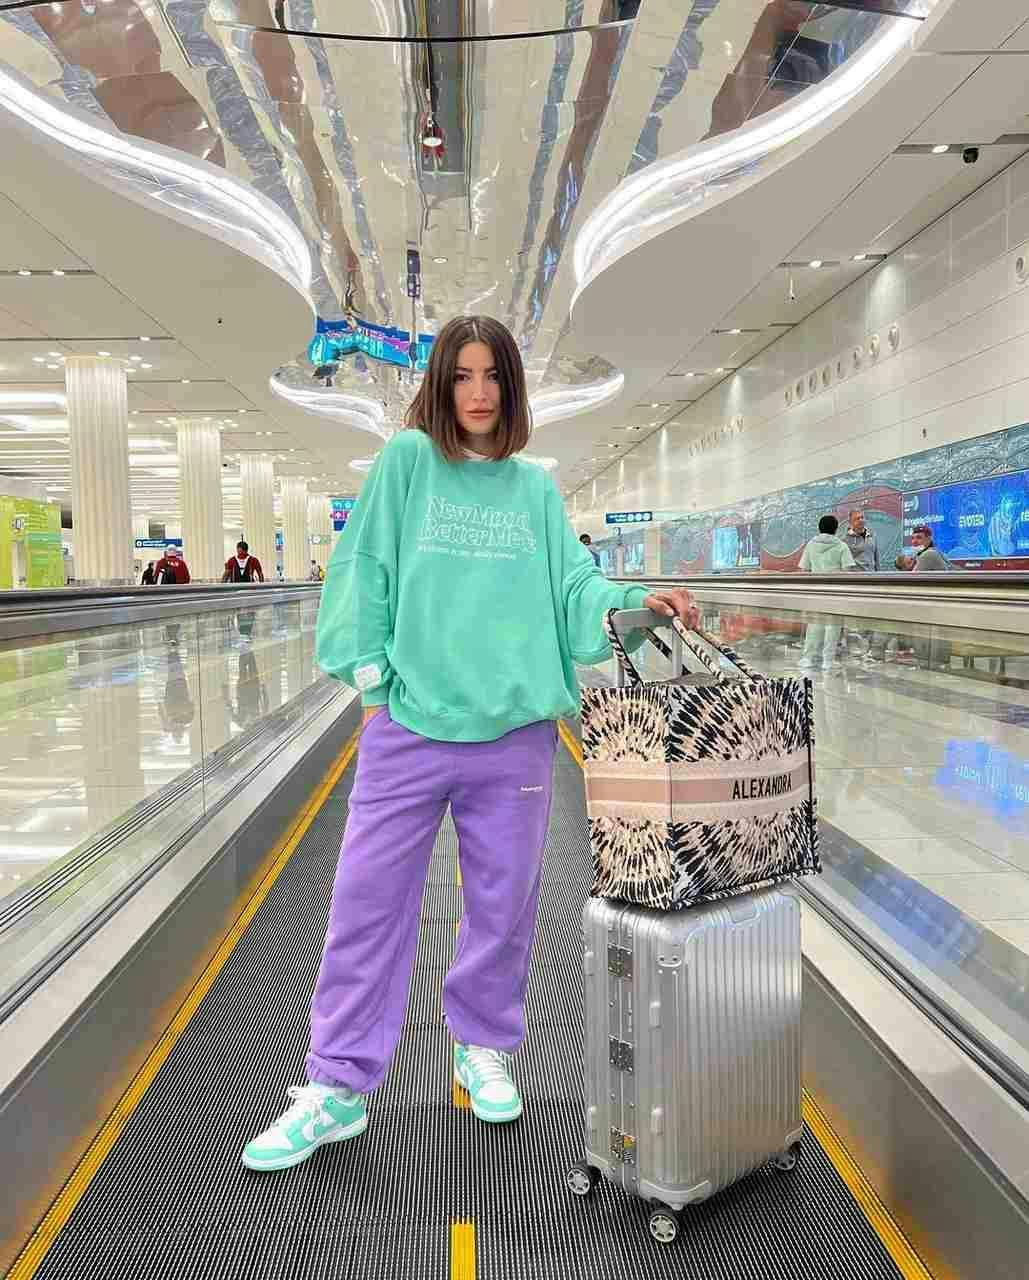 shop person human supermarket market grocery store pants clothing apparel